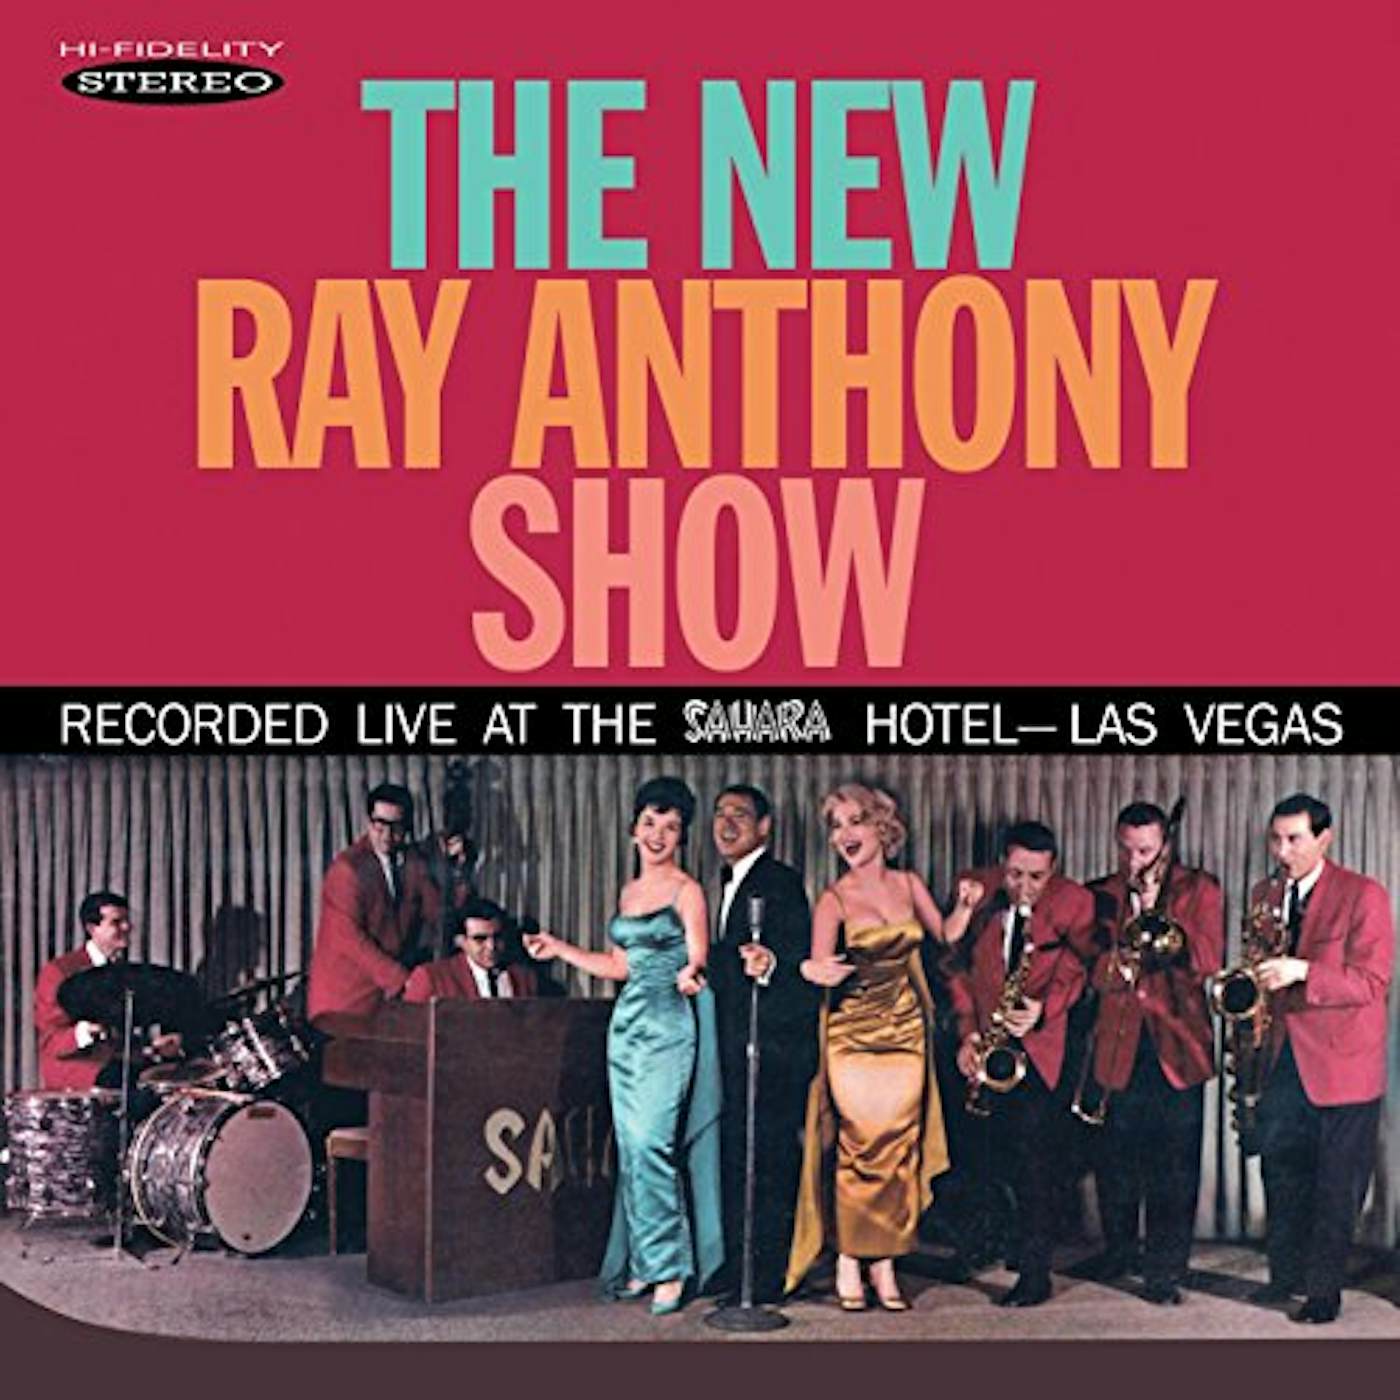 NEW RAY ANTHONY SHOW CD